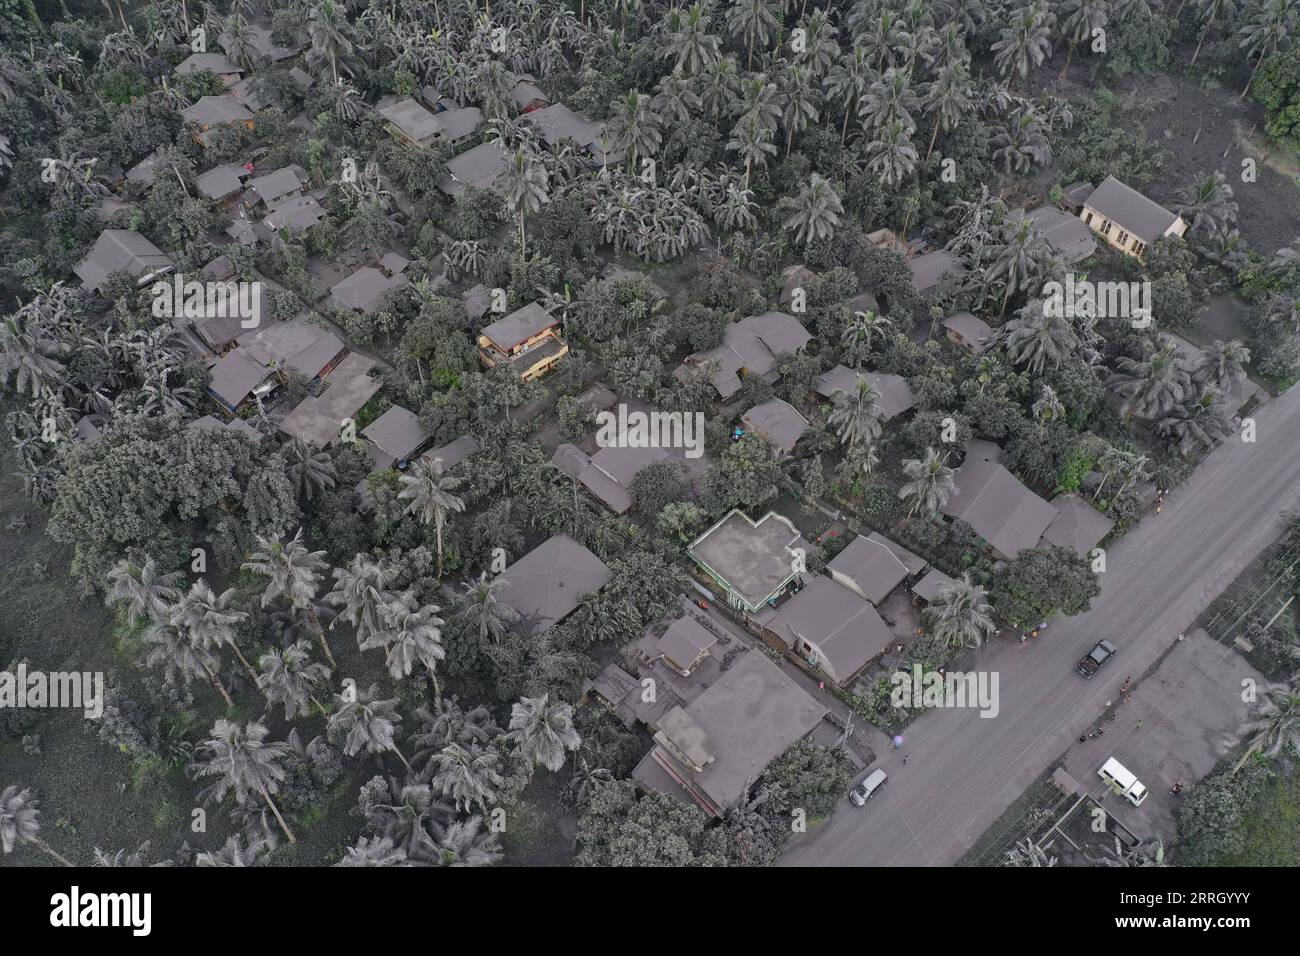 220605 -- SORSOGON PROVINCE, June 5, 2022 -- Aerial photo shows an ash-covered town after the phreatic eruption of Bulusan volcano in Sorsogon Province, the Philippines on June 5, 2022. The Philippine Institute of Volcanology and Seismology on Sunday raised the alert level for Bulusan volcano from zero to one after the volcano in Sorsogon province, southeast of Manila, spewed a grey plume about a kilometer high into the sky. /Handout via Xinhua PHILIPPINES-BULUSAN VOLCANO-ERUPTION SorsogonxProvincialxInformationxOffice PUBLICATIONxNOTxINxCHN Stock Photo